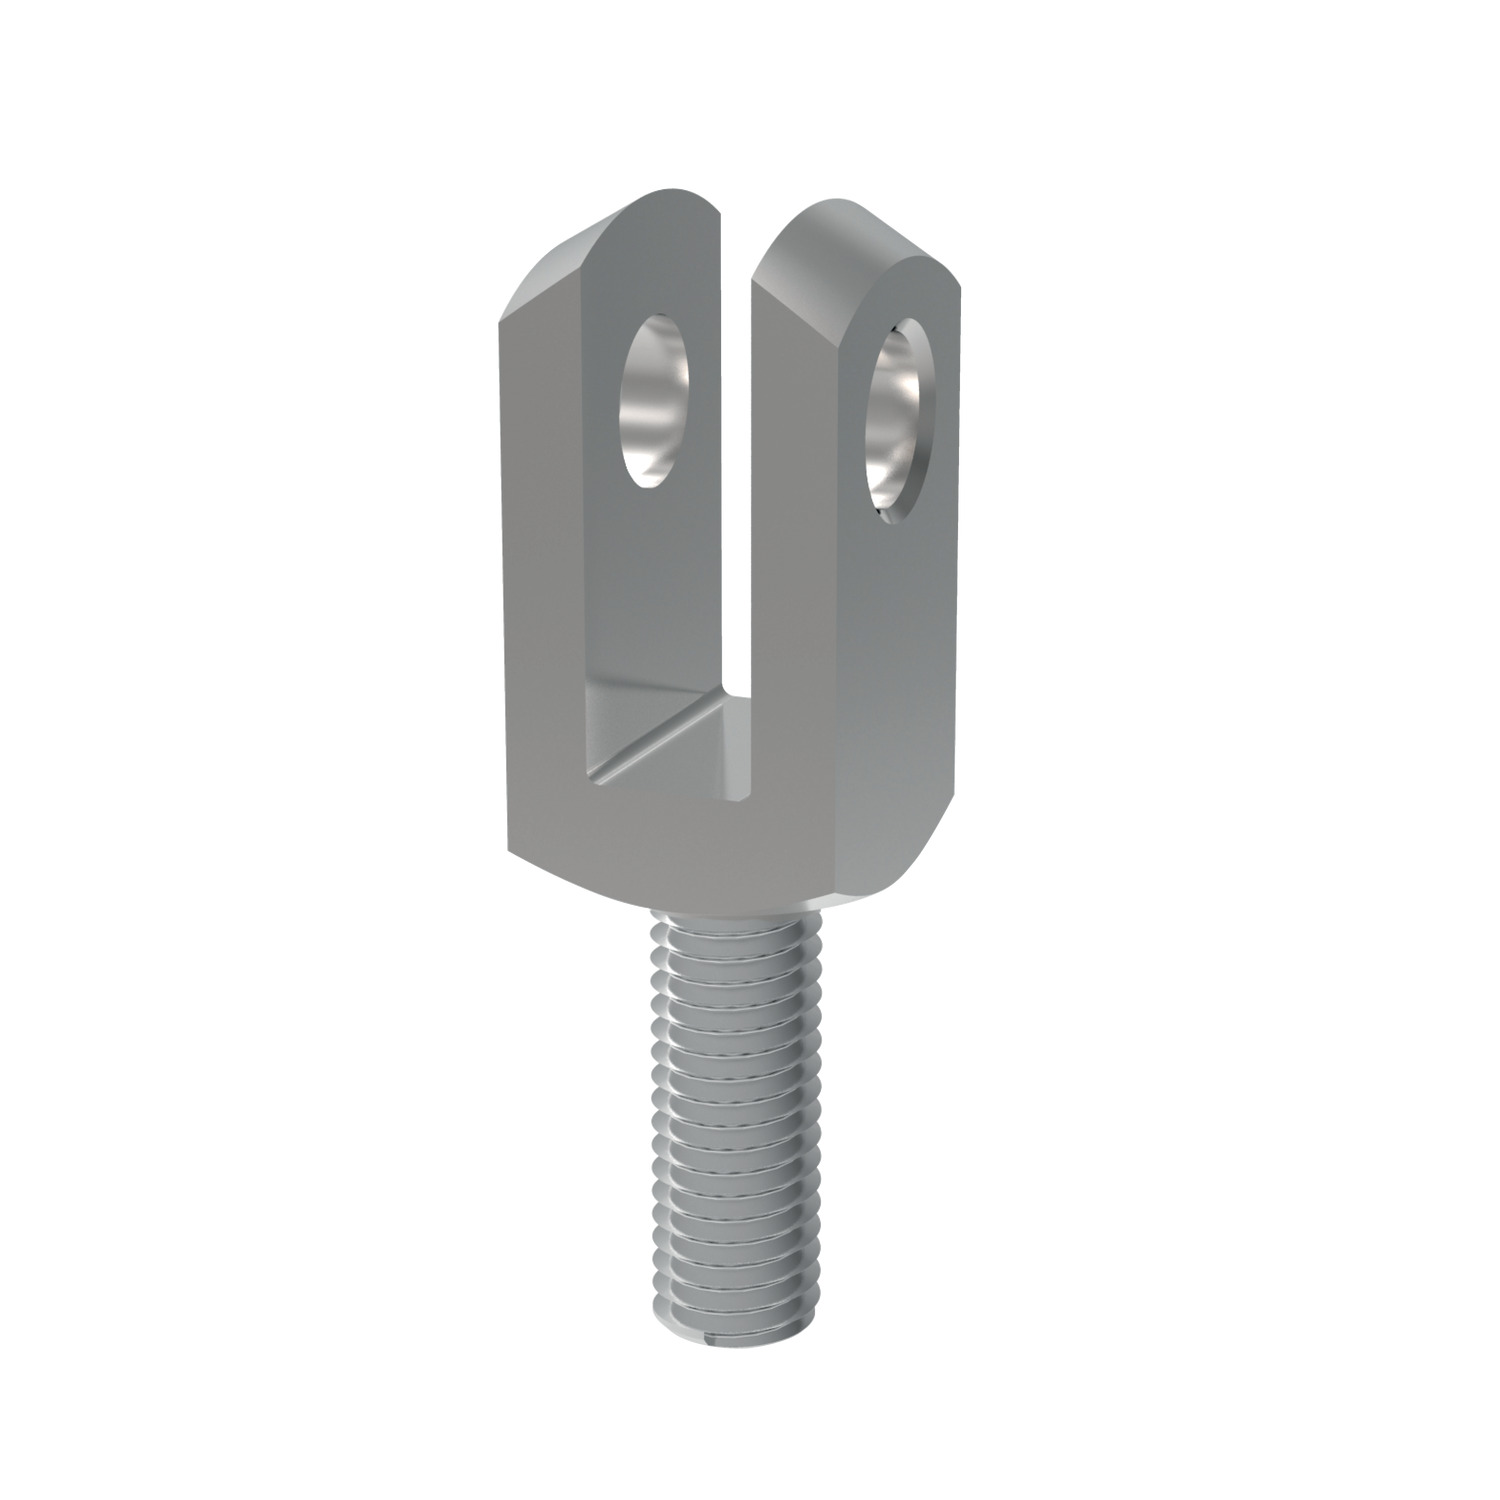 Product R3410, Male Clevis Joints silver zinc plated / 